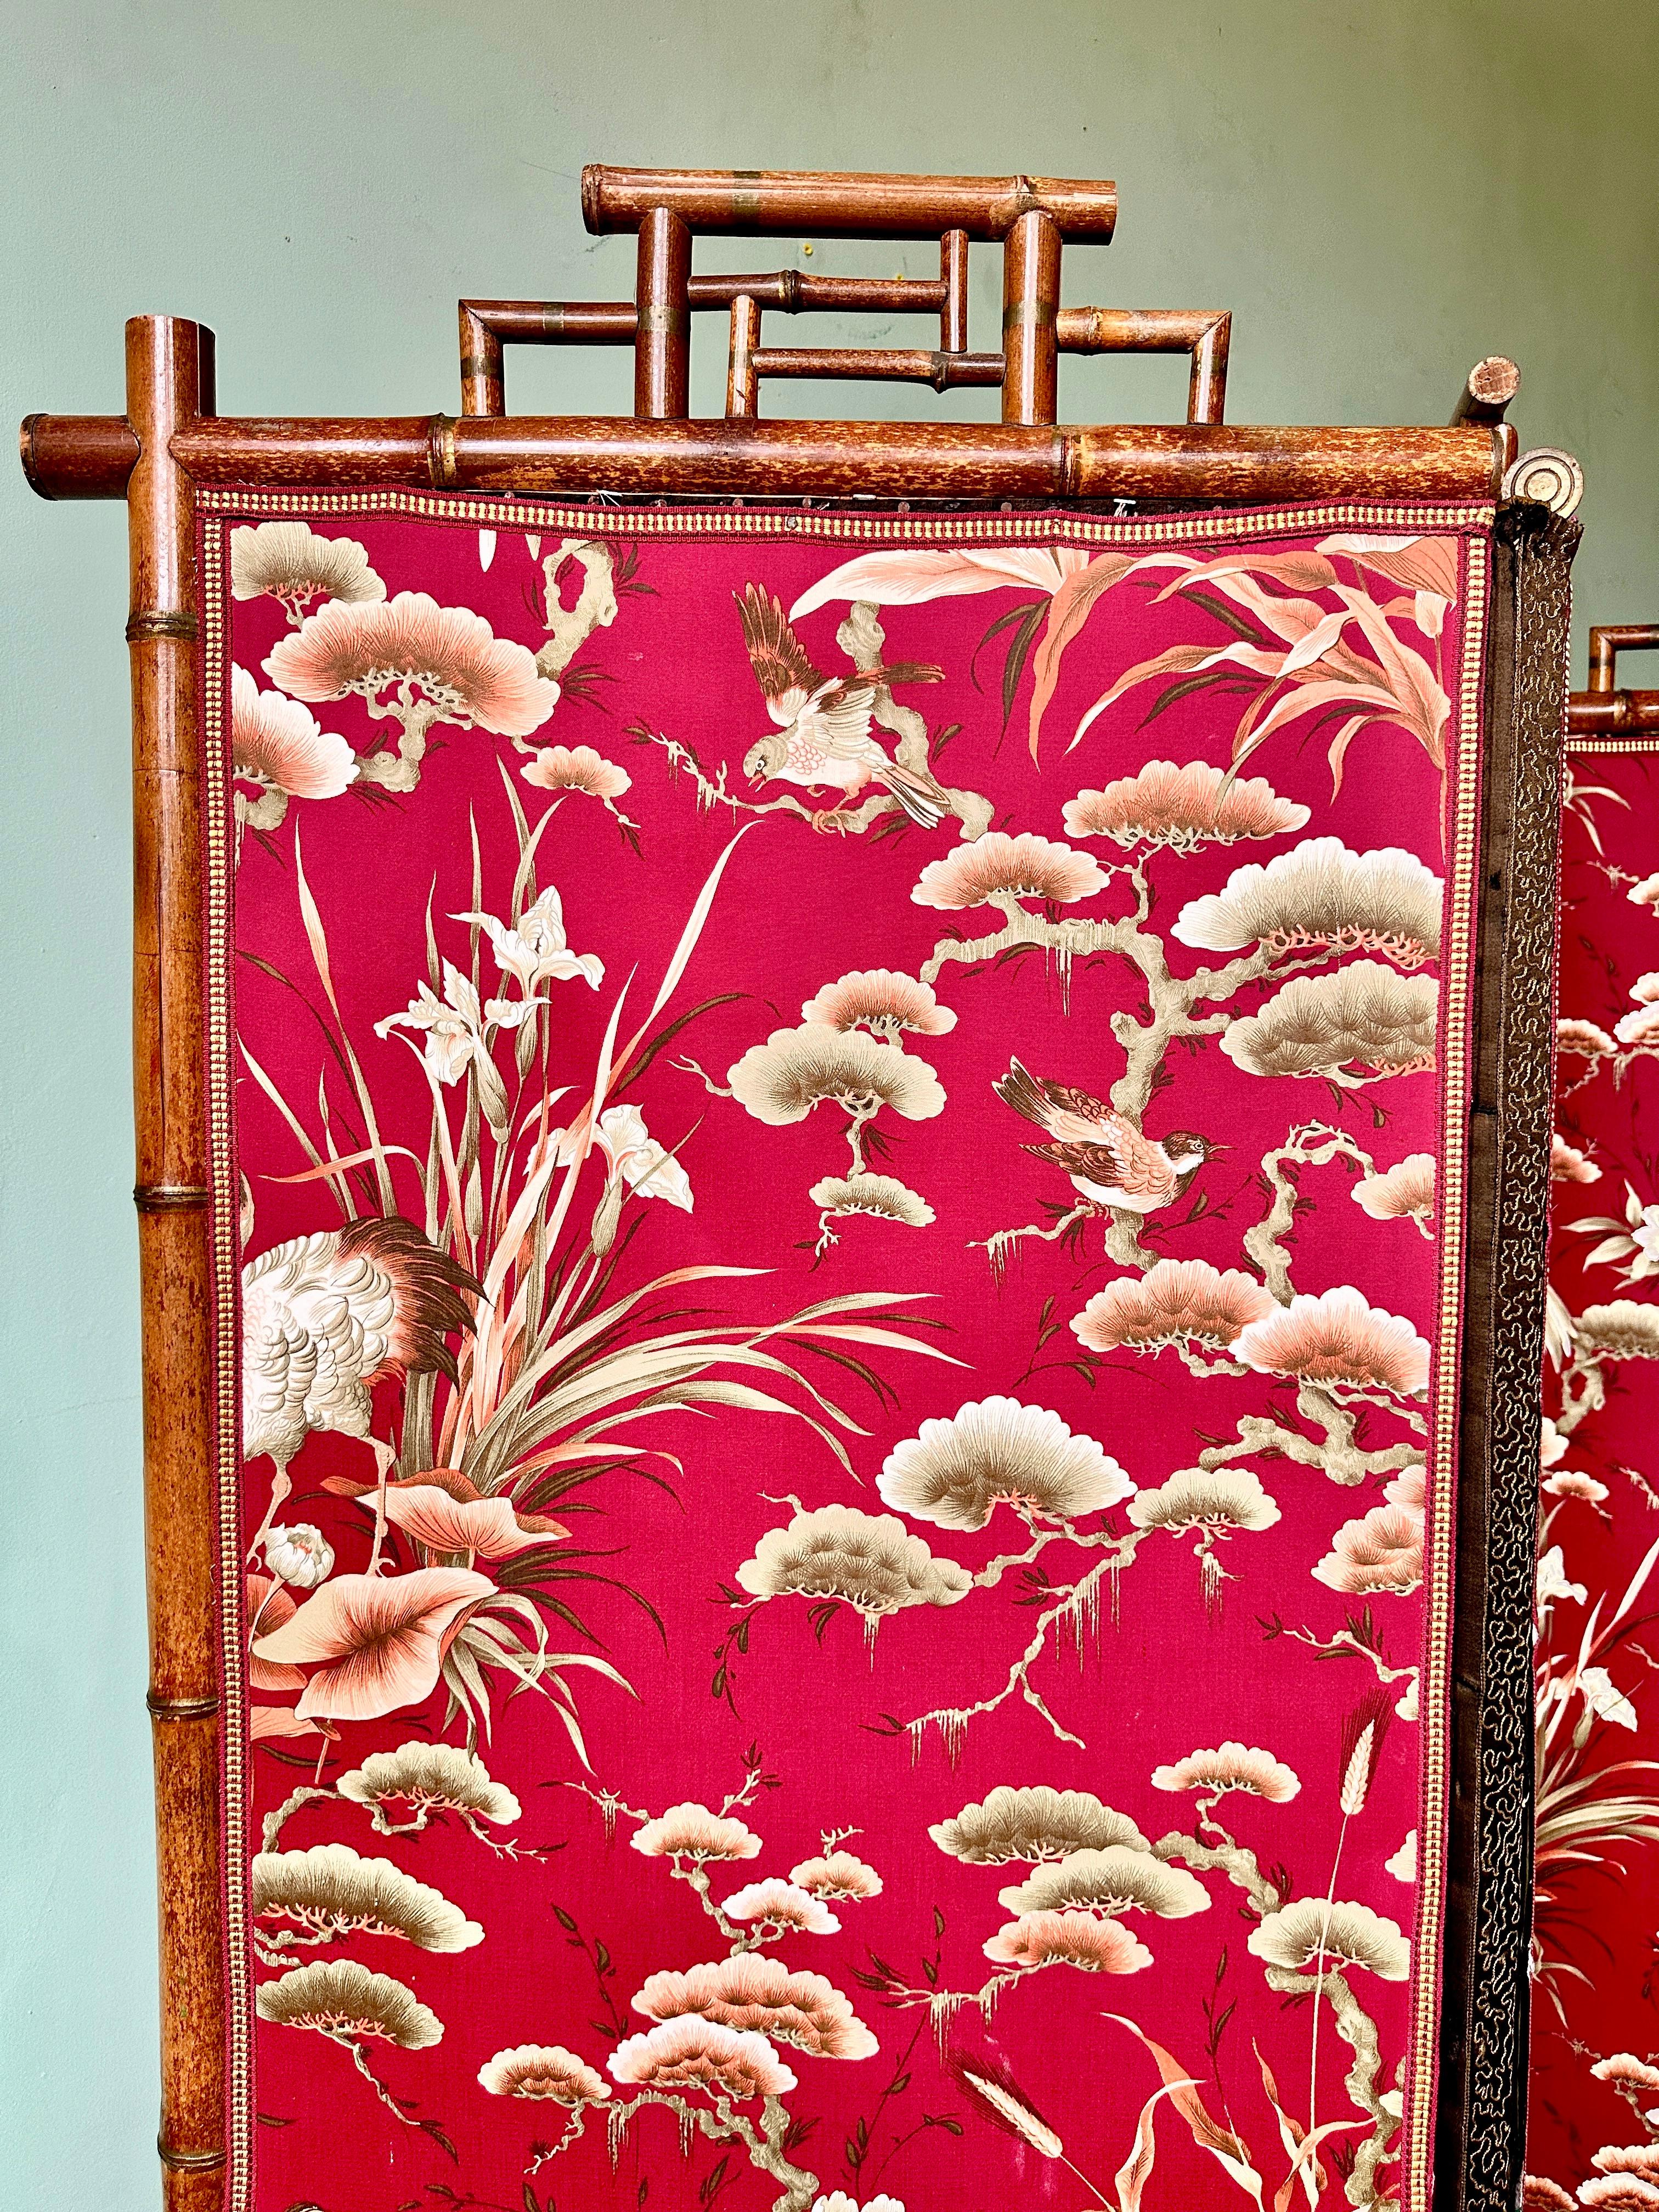 Large C19th Japanese Silk & Bamboo Screen or Room Divider In Good Condition For Sale In London, GB